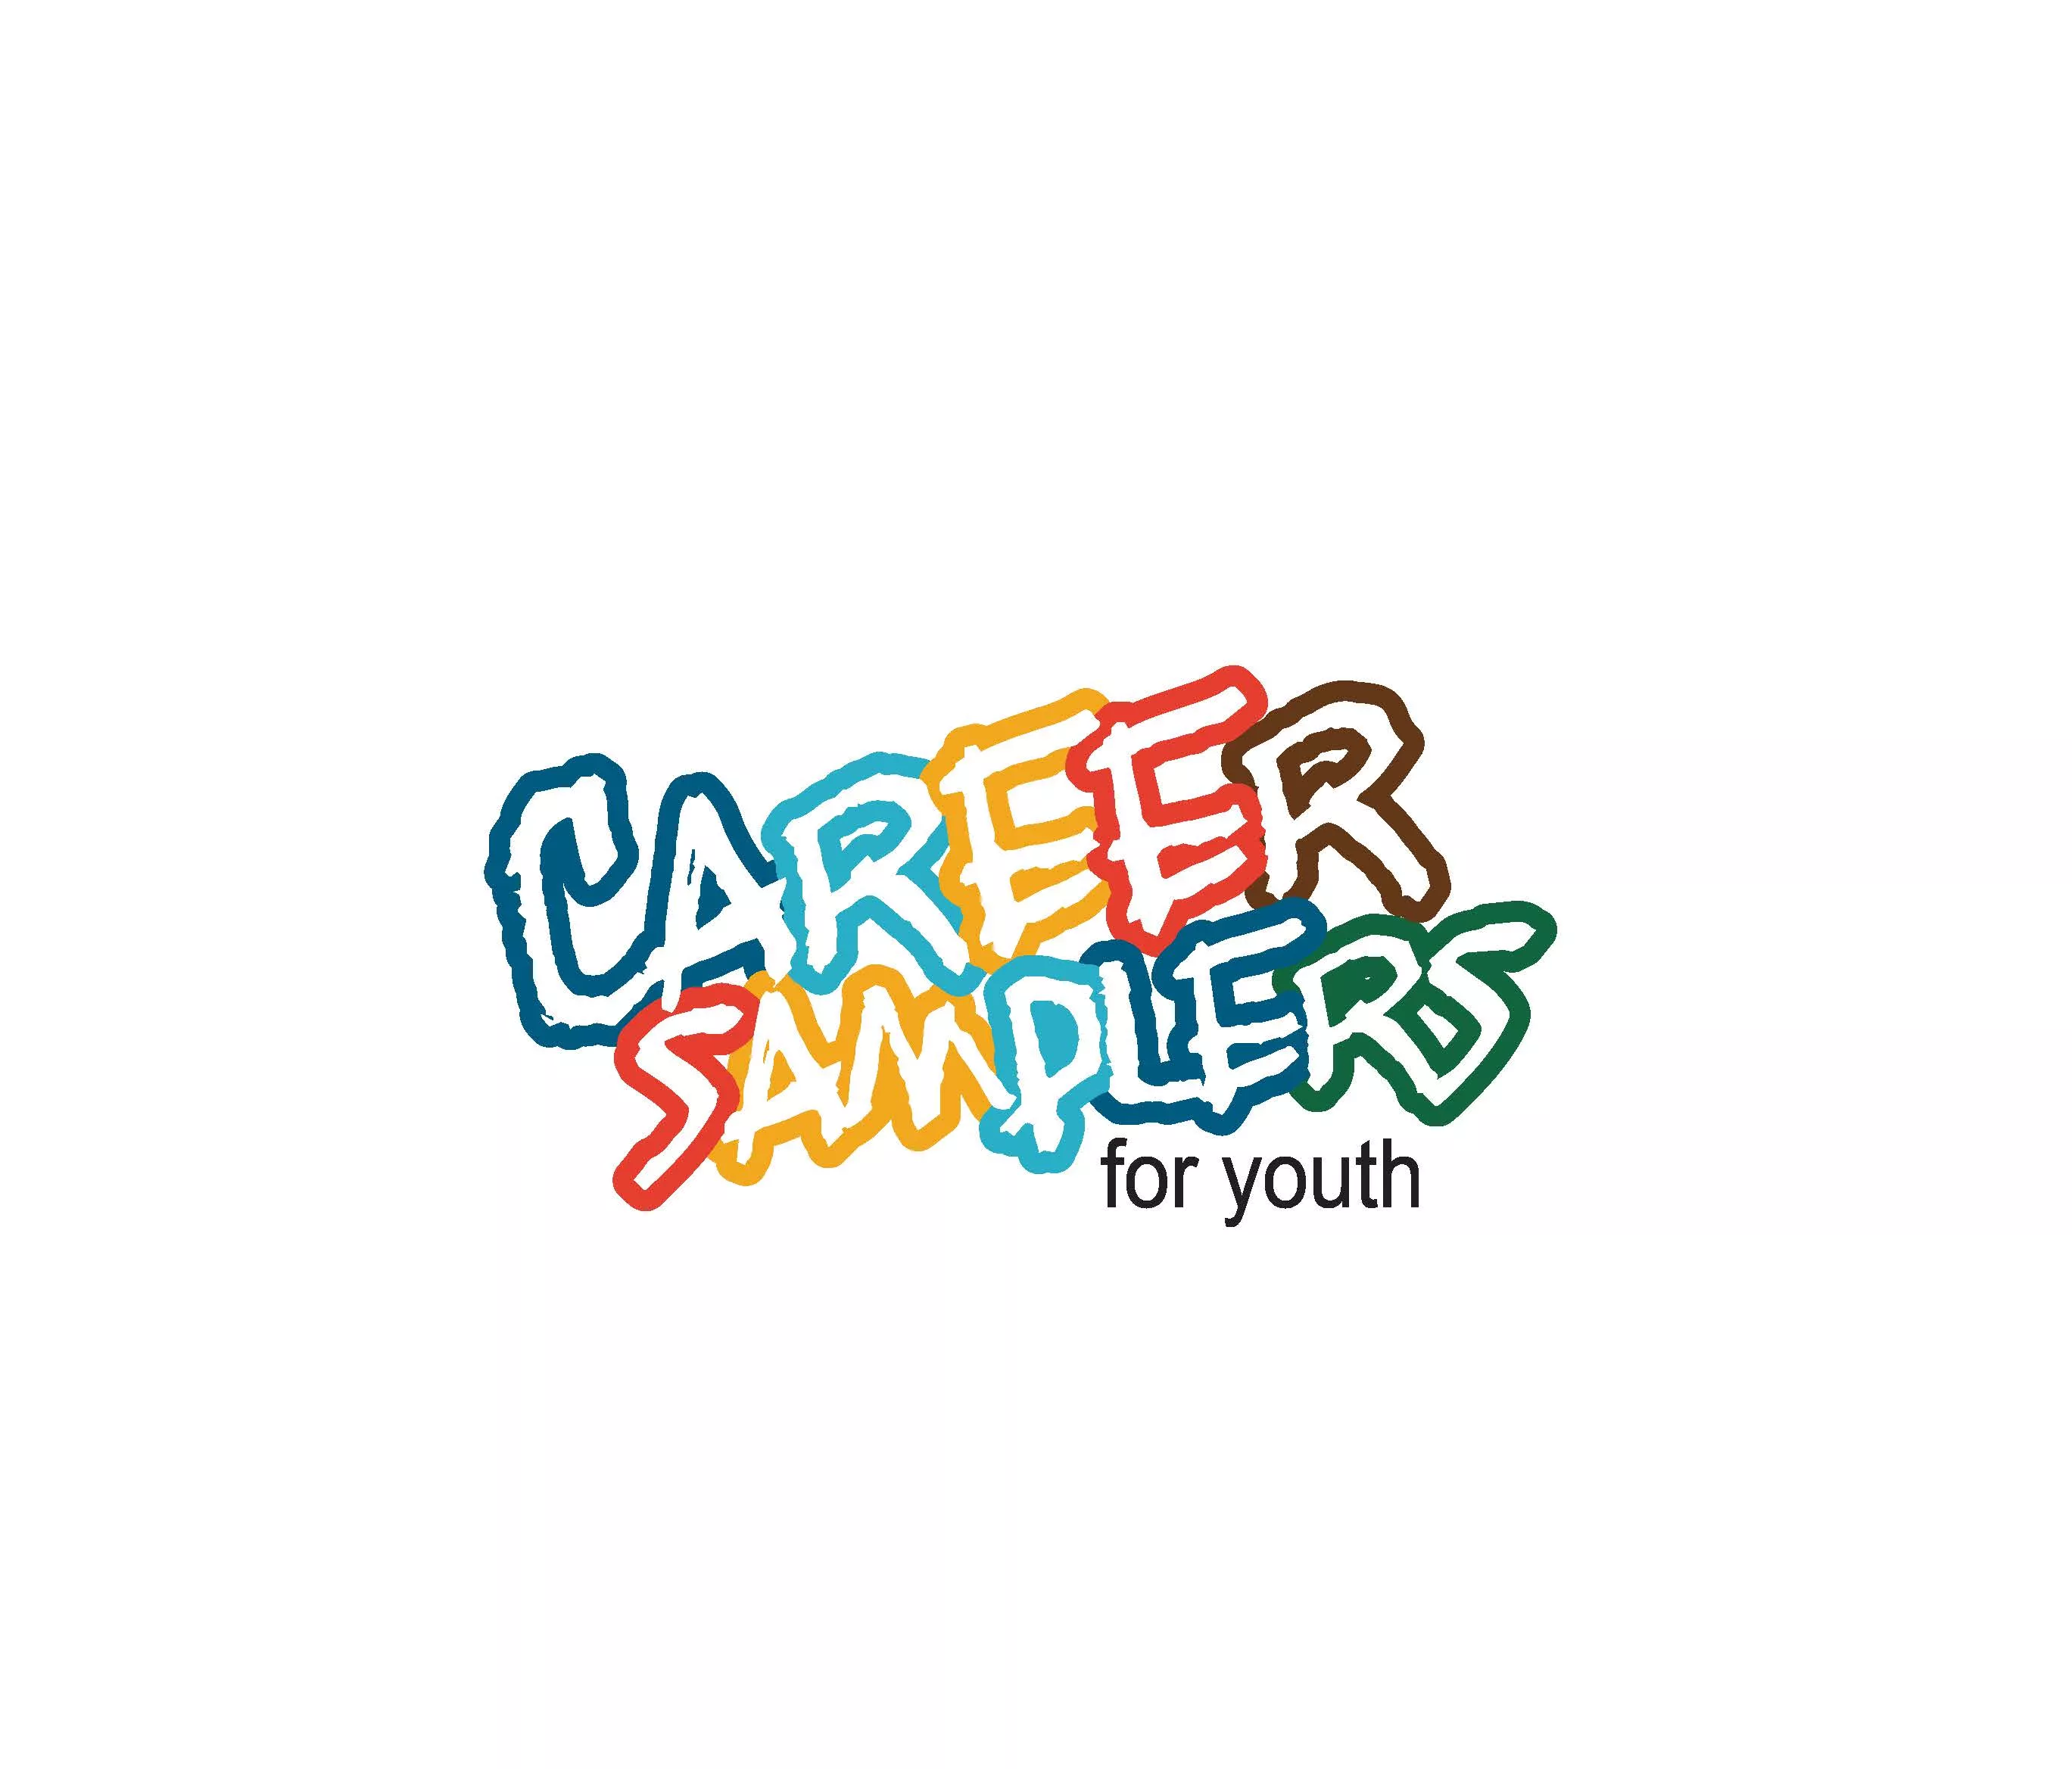 career samplers for youth